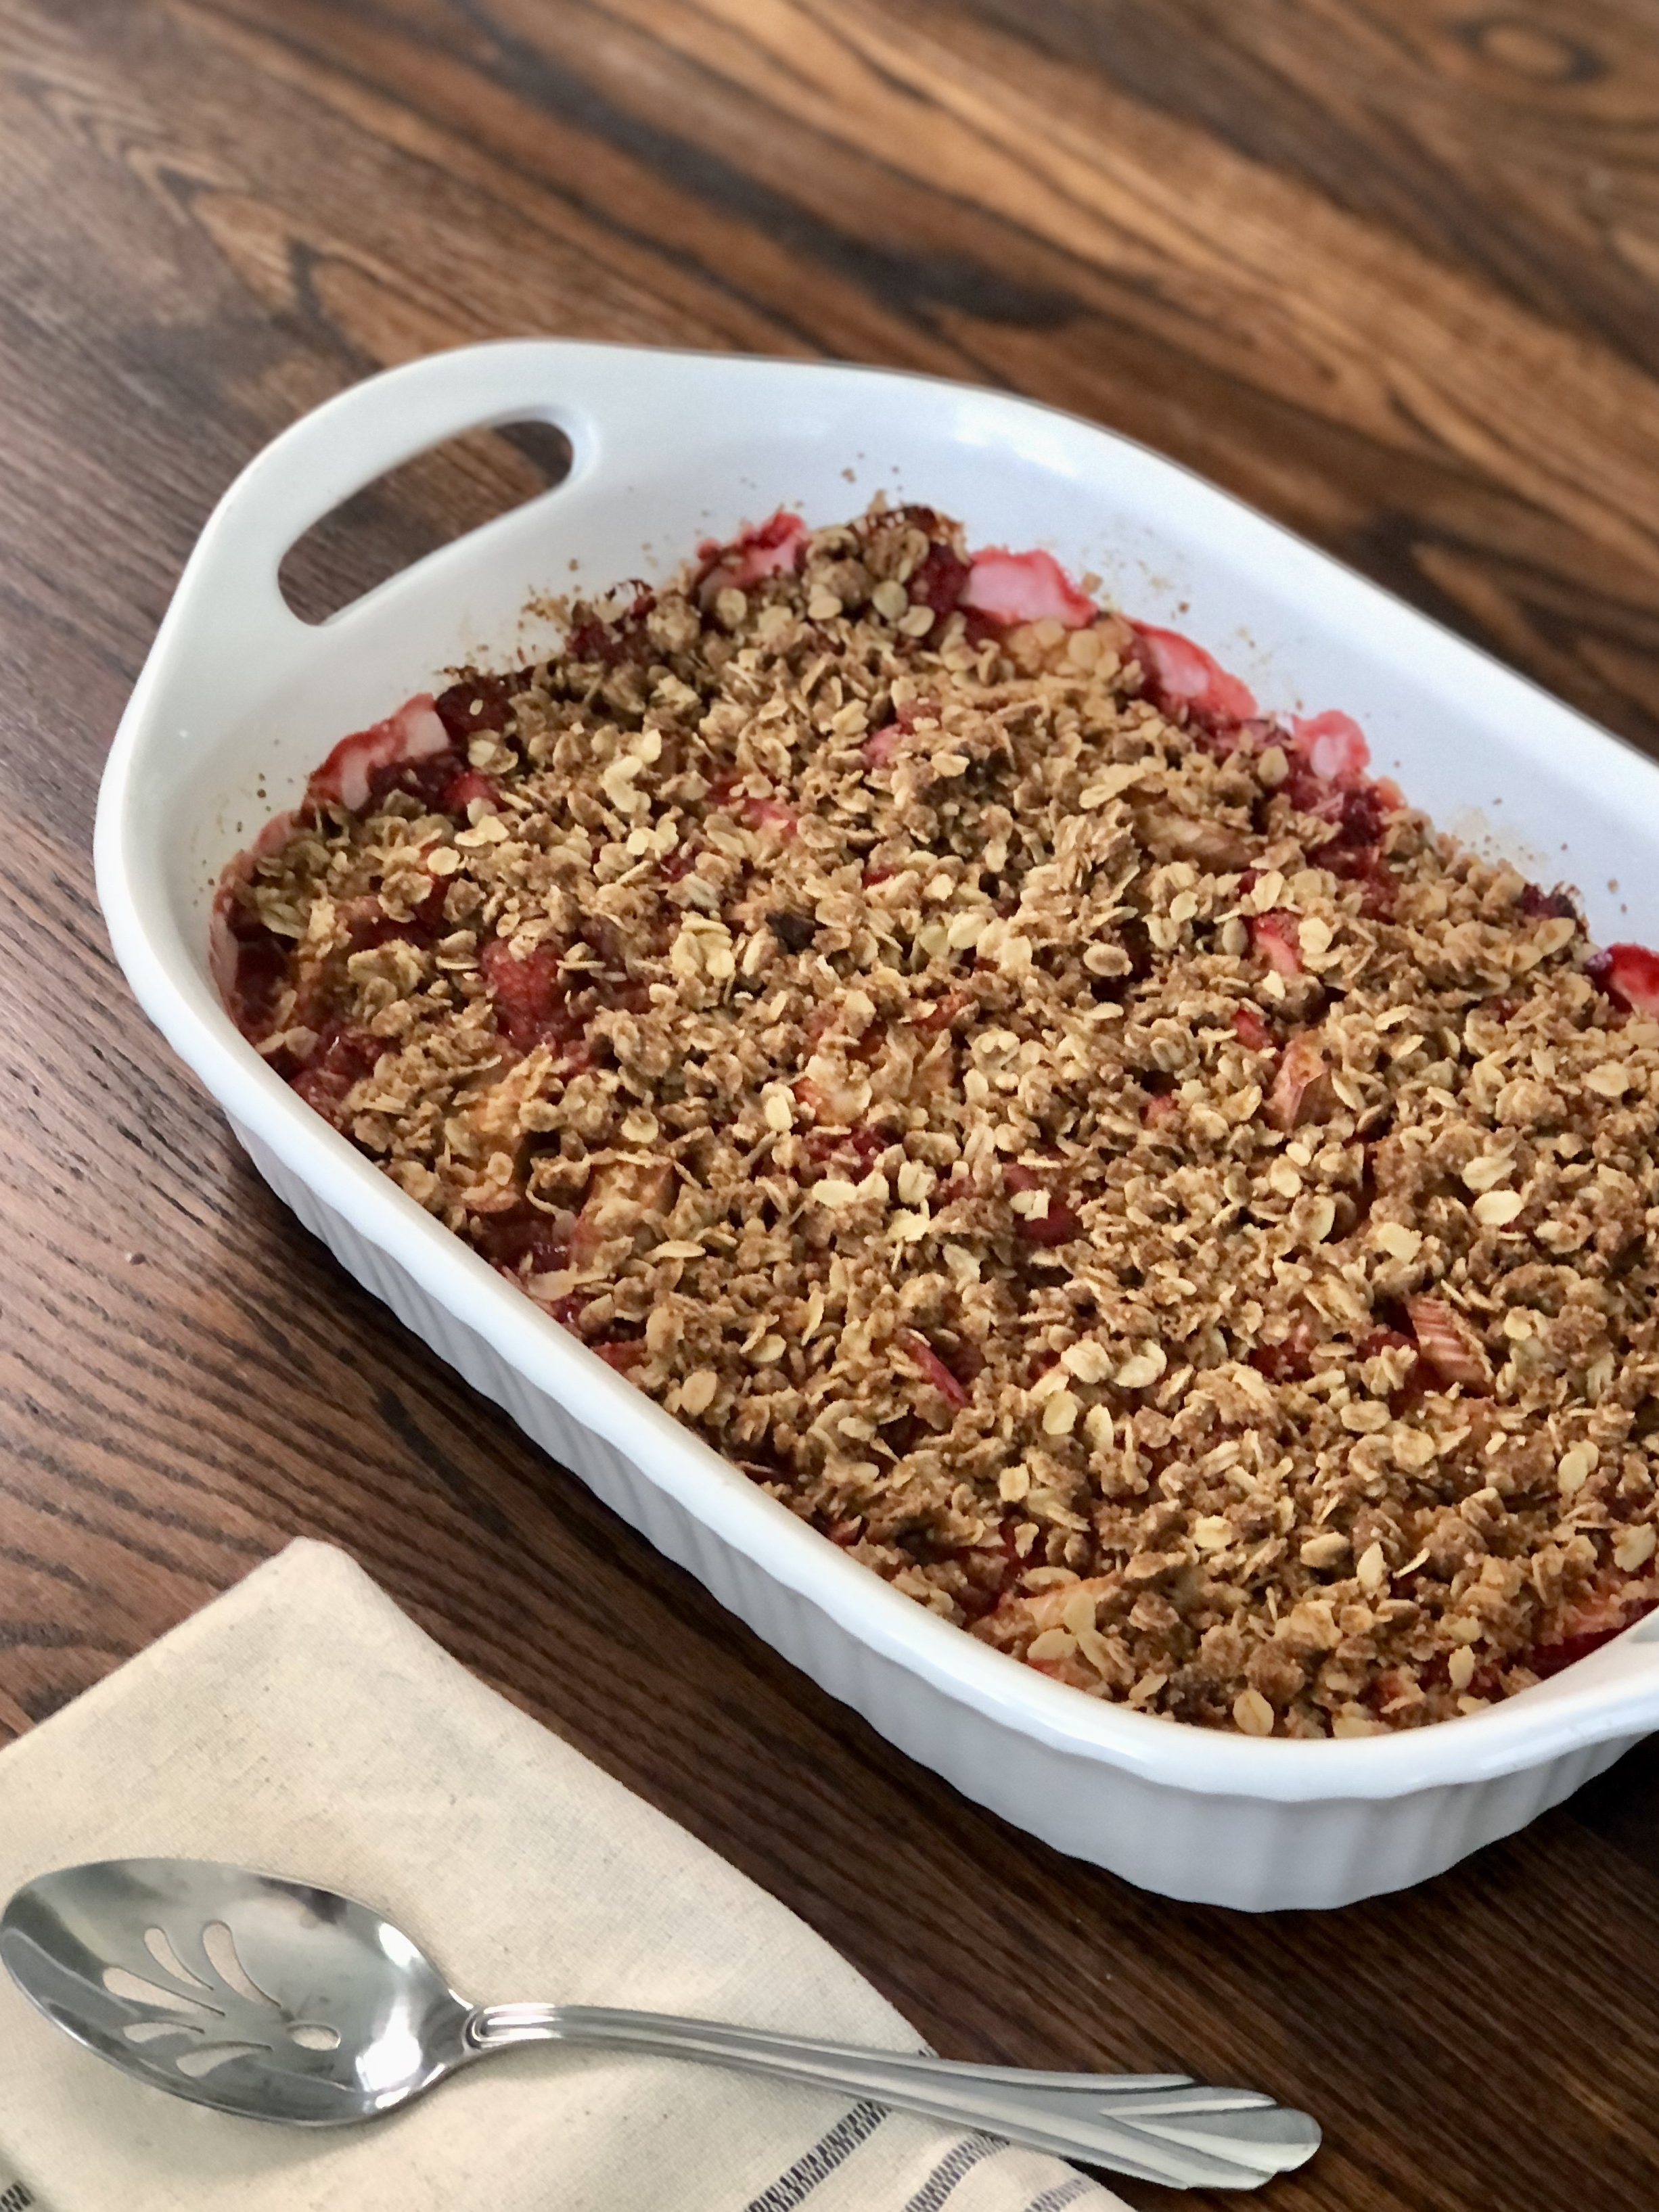 The baked strawberry rhubarb crumble in a white casserole dish on a wood table with serving spoon.